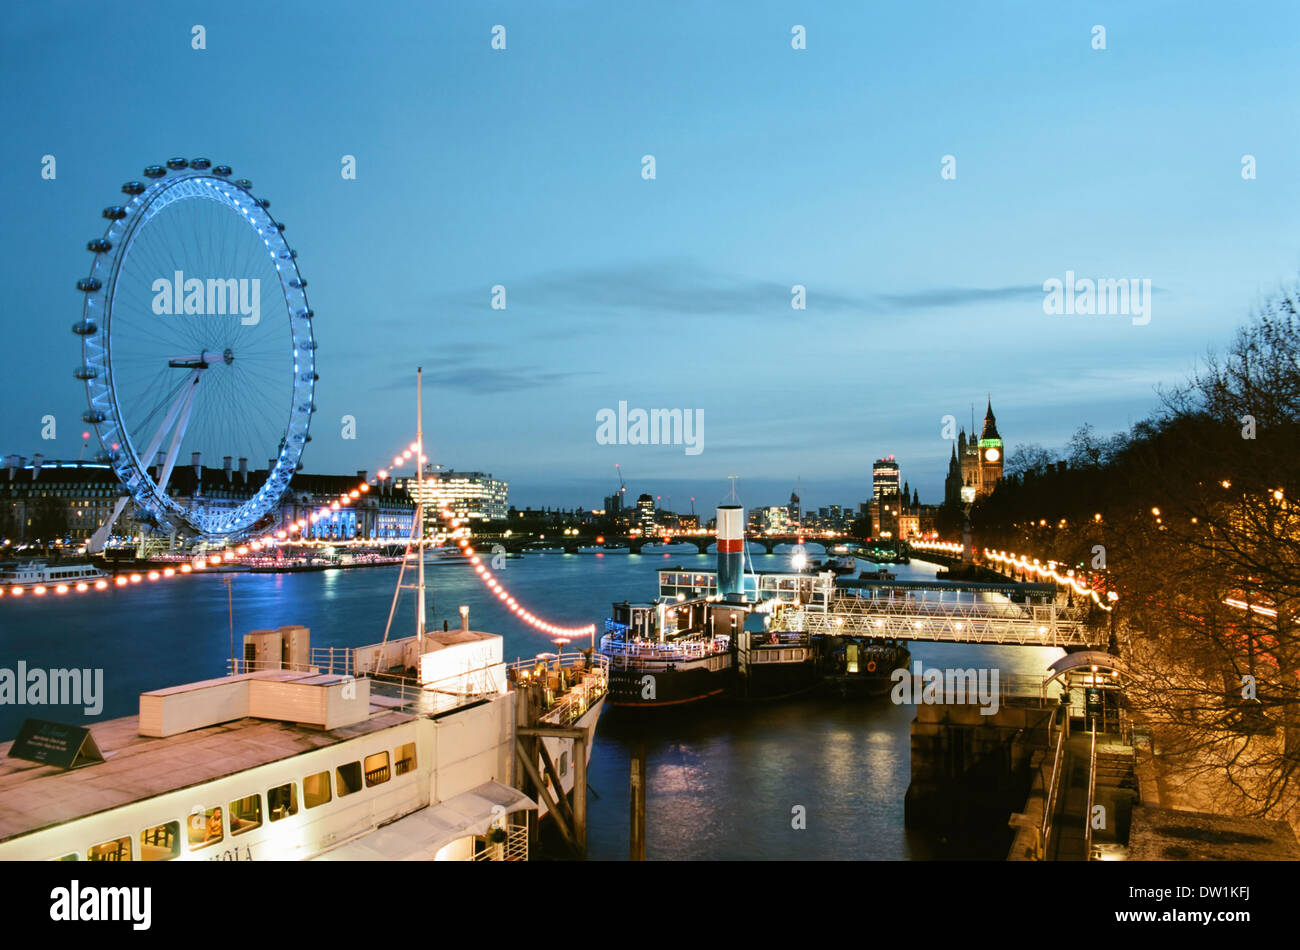 River Thames in winter with the London Eye and boats at dusk, London UK Stock Photo